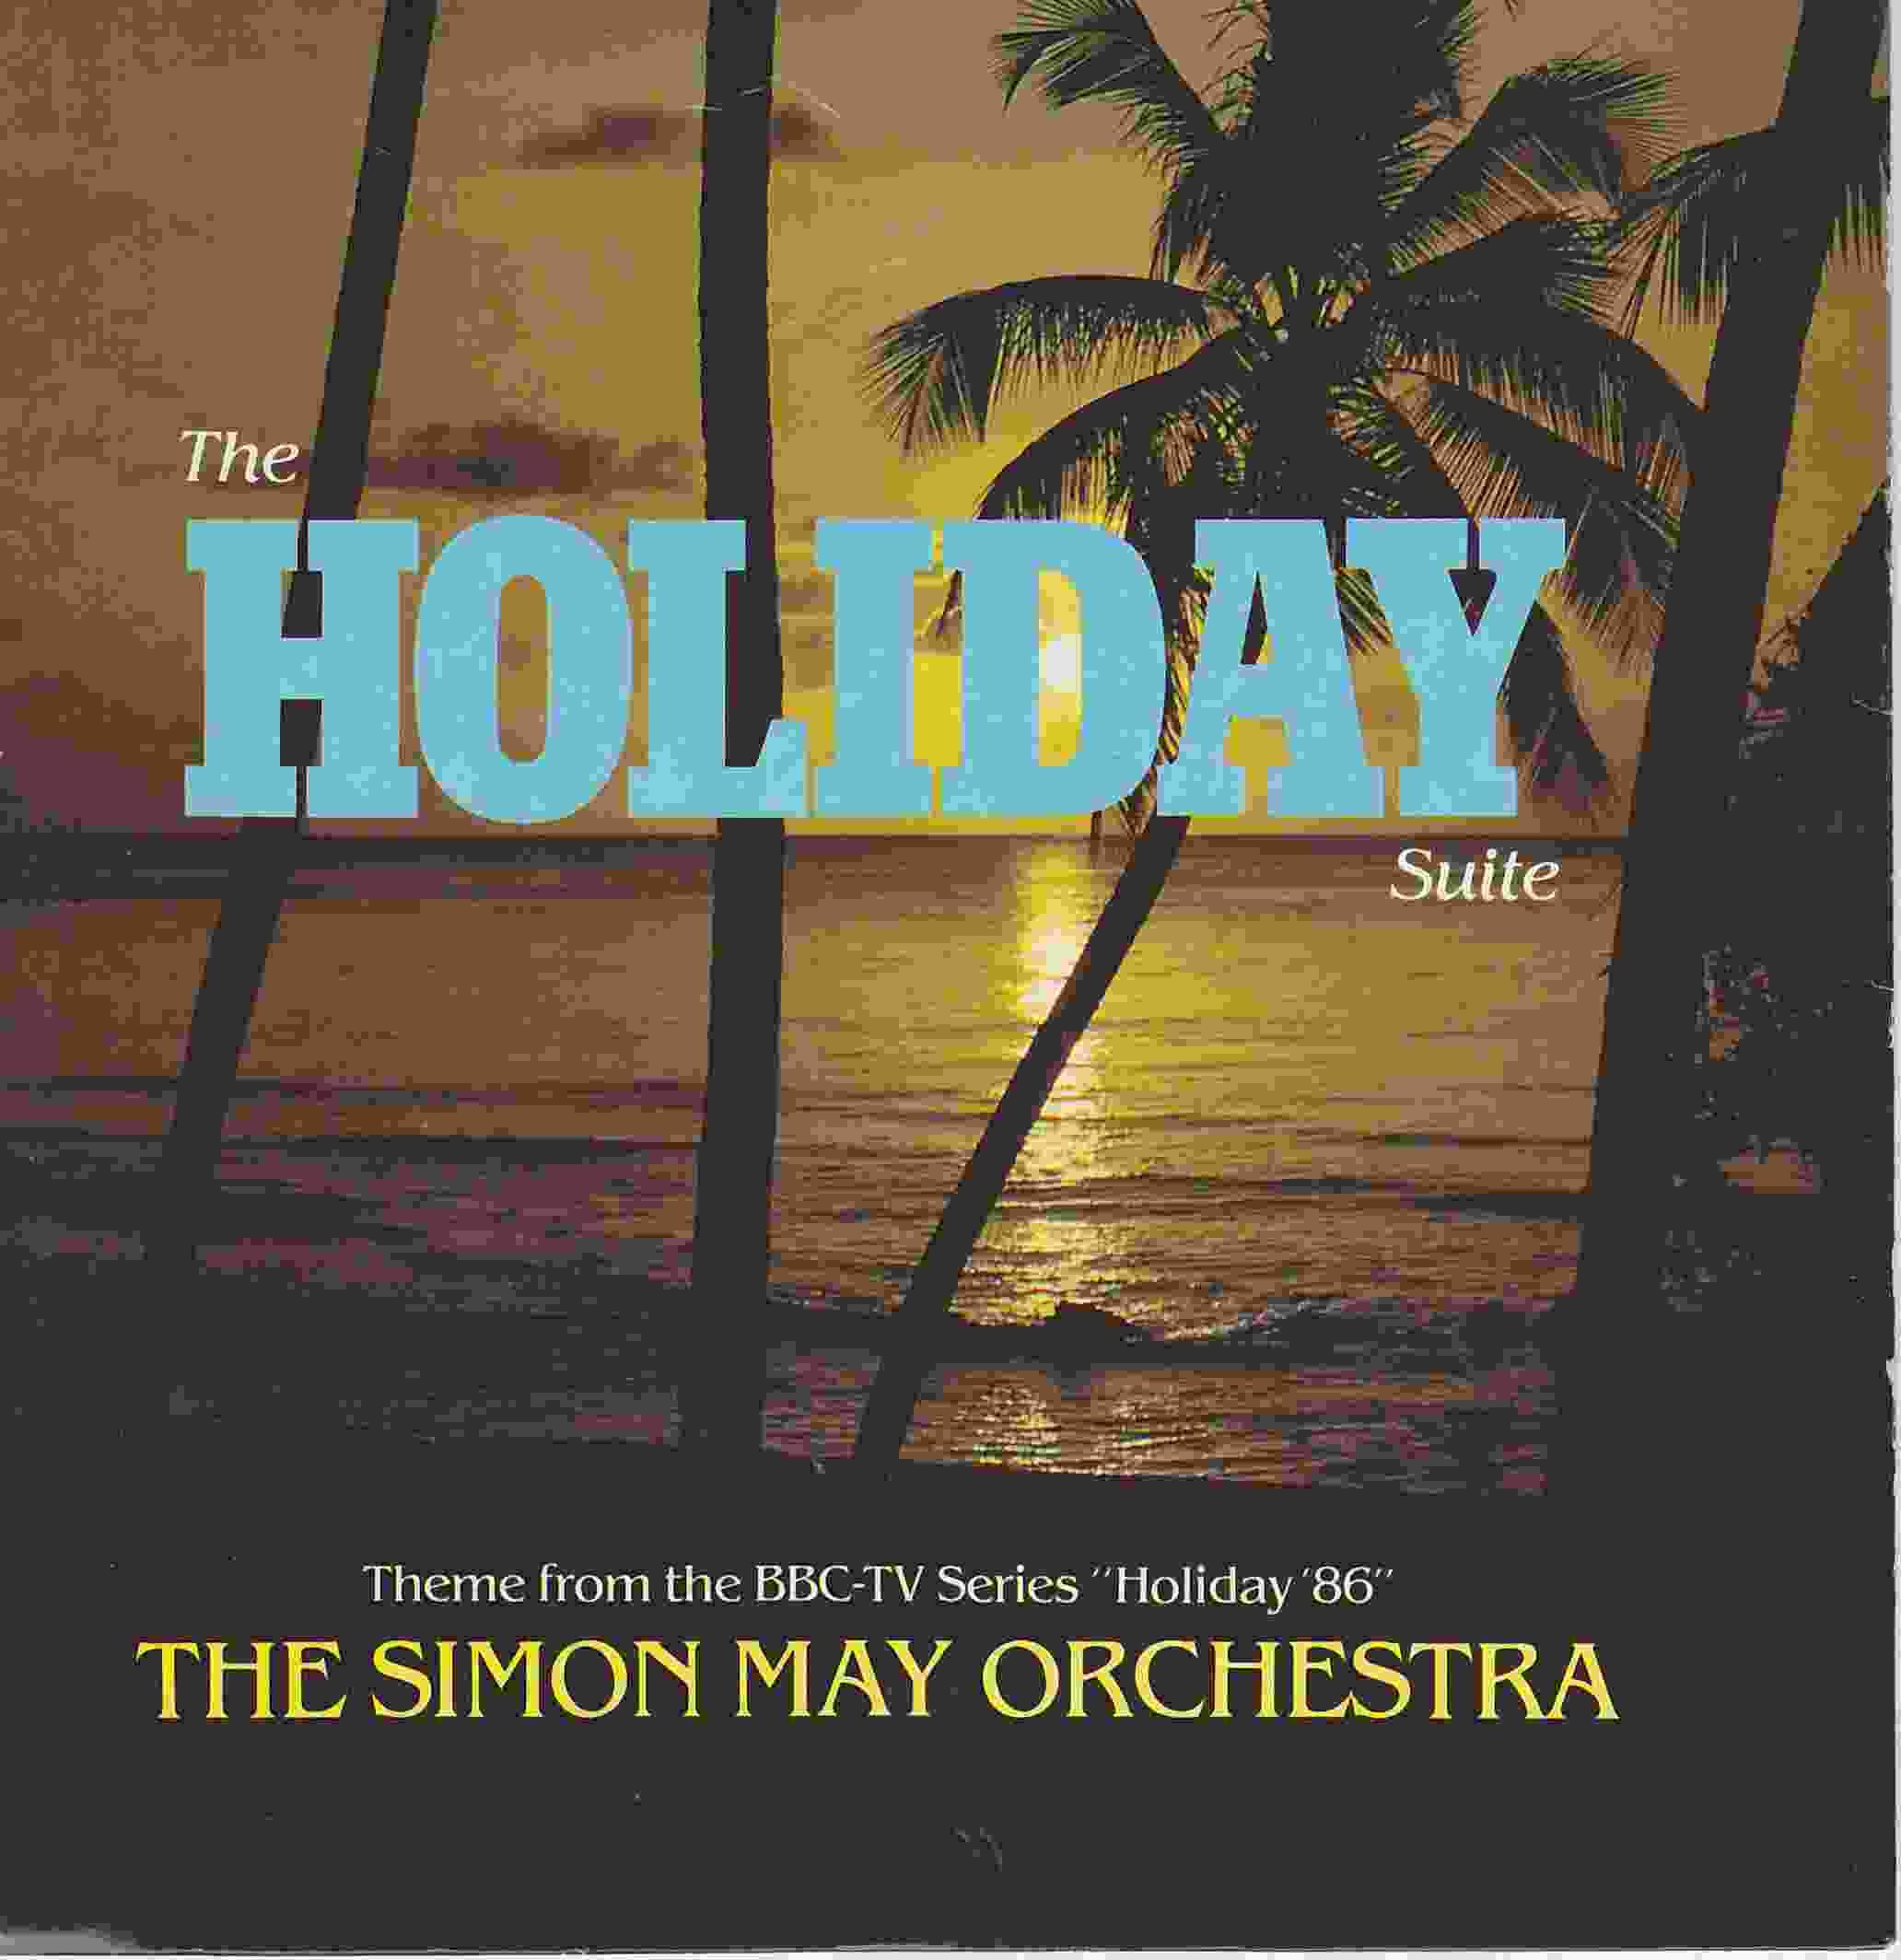 Picture of RESL 181 The holiday suite (Holiday '86) by artist The Simon May Orchestra from the BBC singles - Records and Tapes library